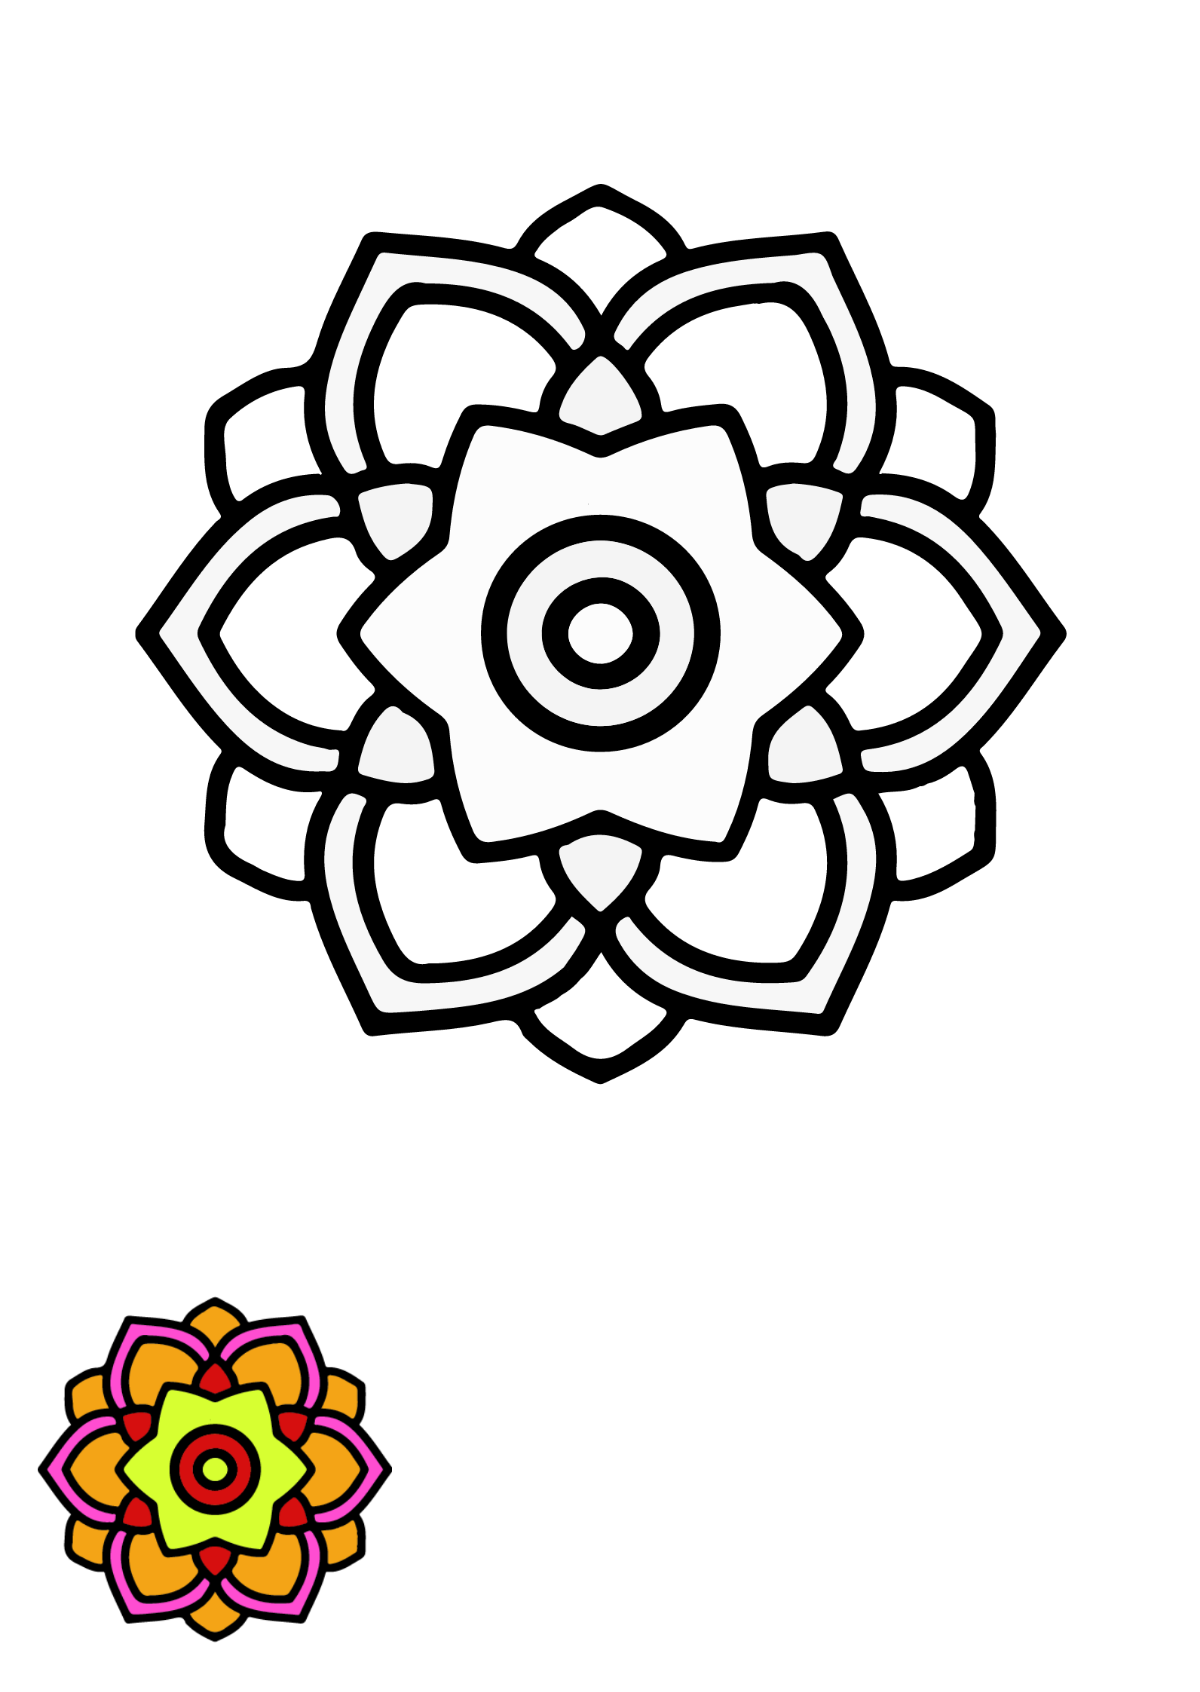 Mandala Flower Coloring Page Template